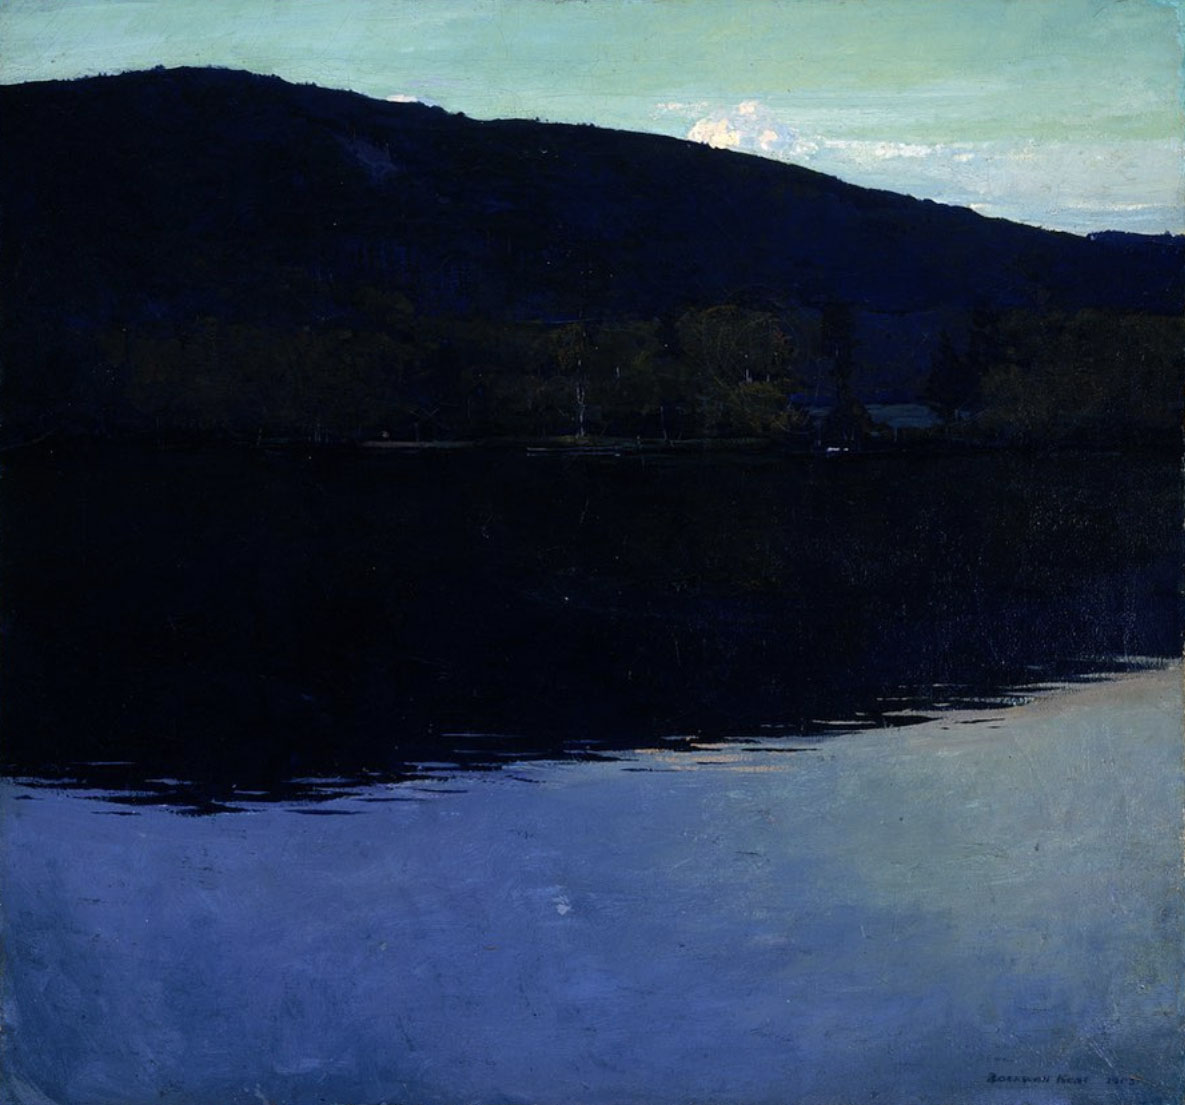 Rockwell Kent, American, 1882–1971. Dublin Pond, 1903. Painting, oil on canvas. Purchased with the Winthrop Hillyer Fund